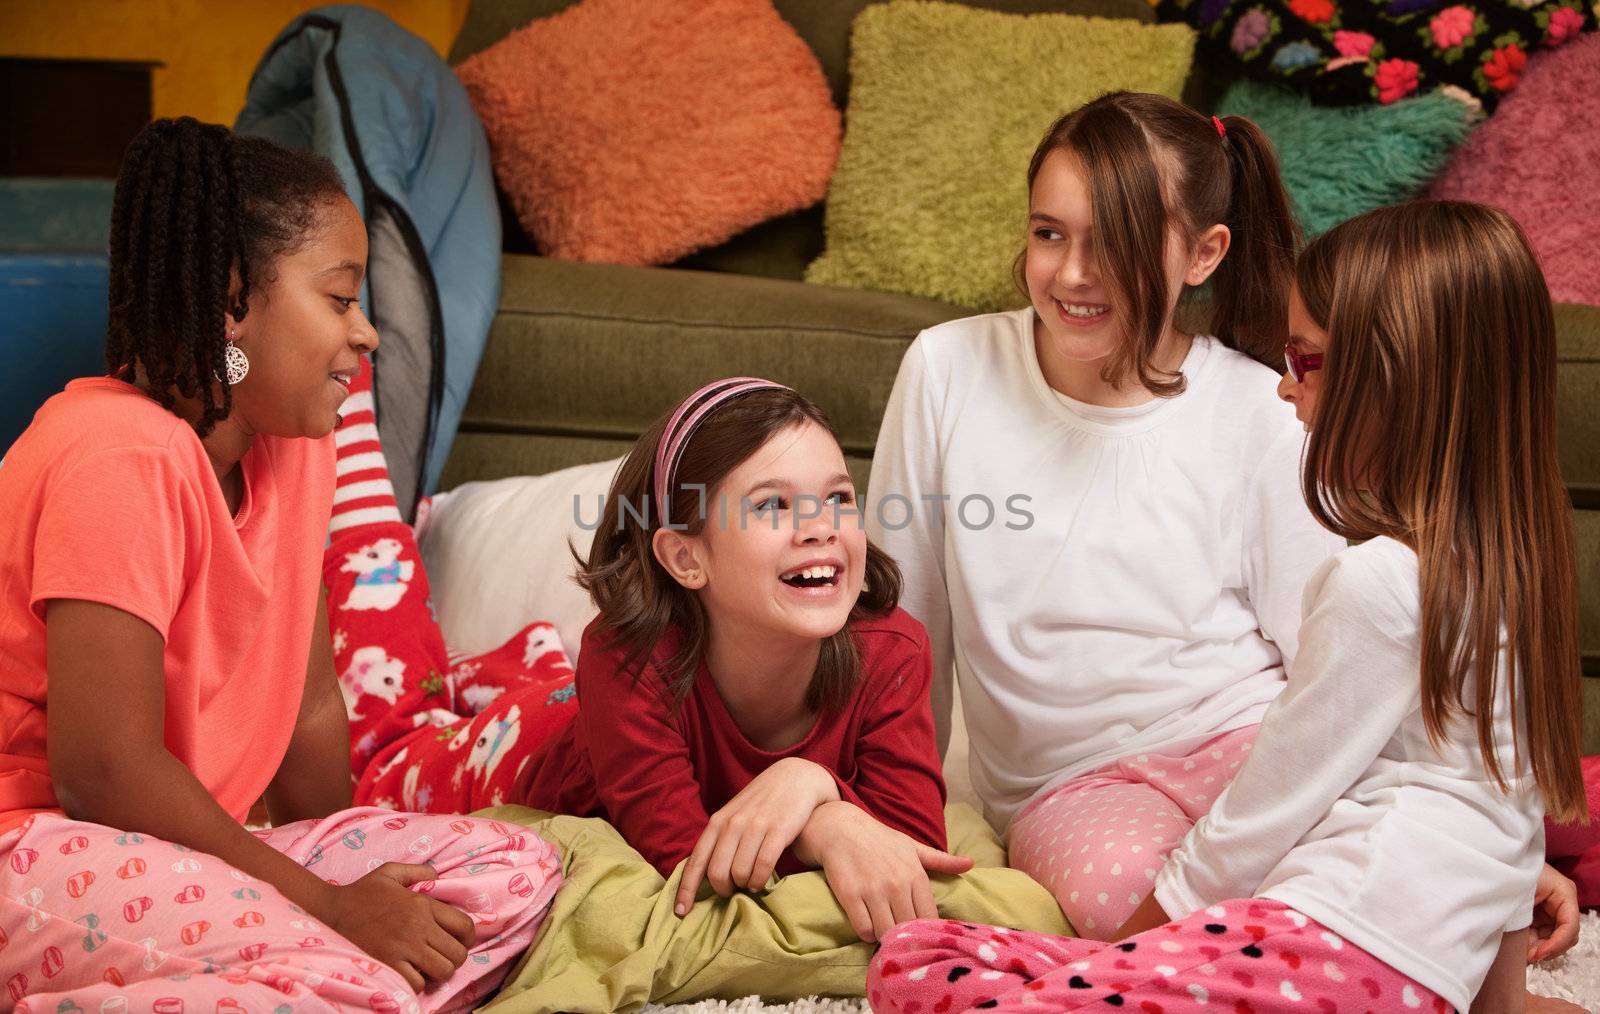 Group of happy young girls at a sleepover